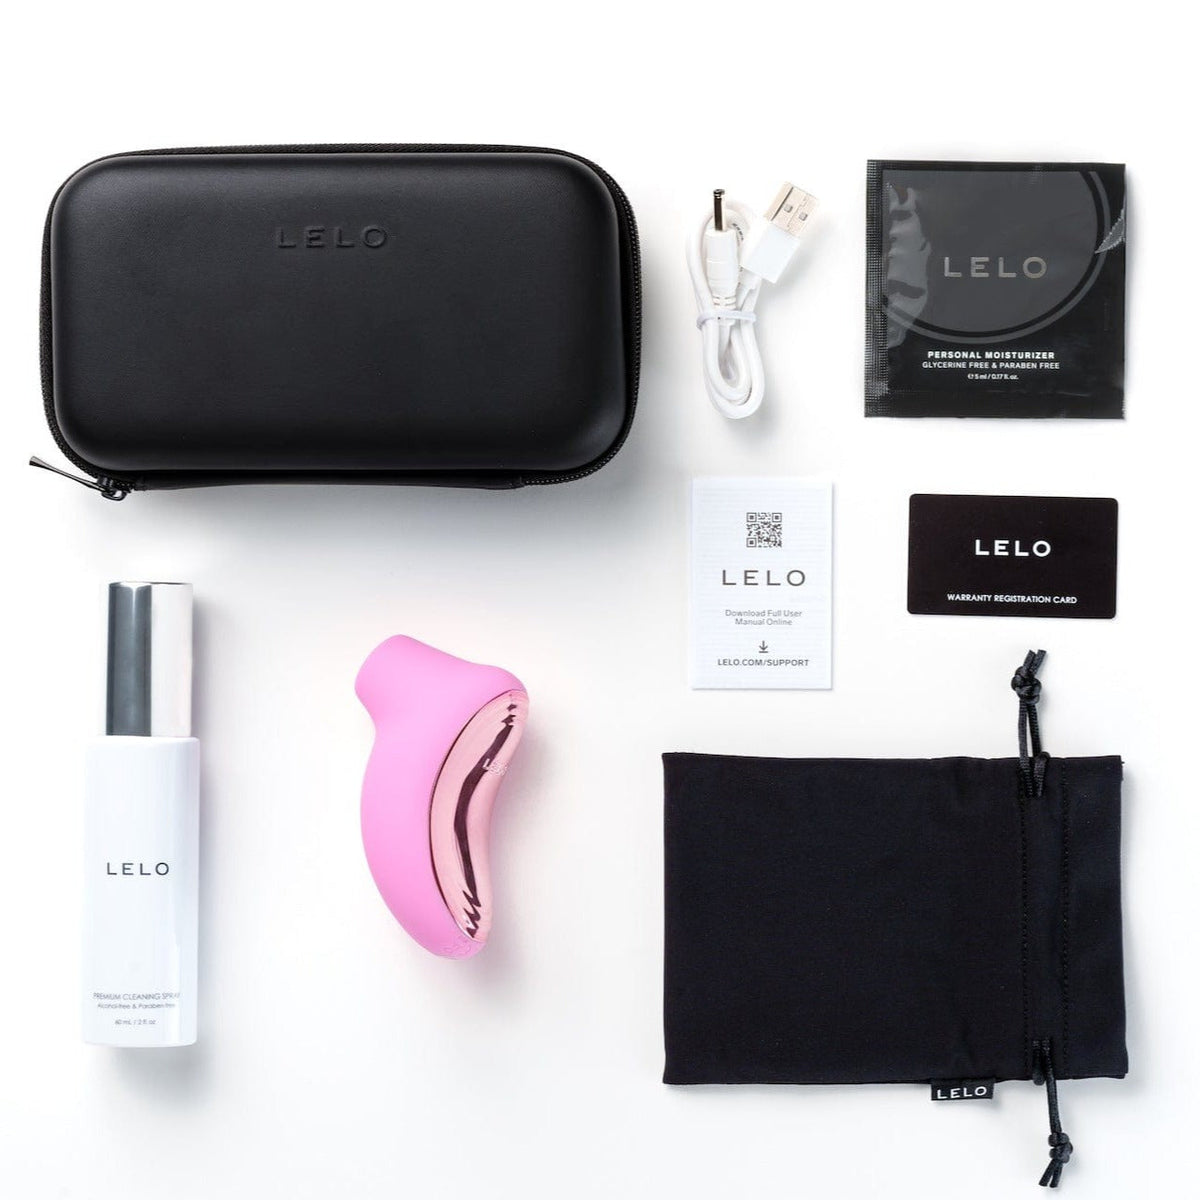 LELO - Pleasure On The Go Kit A Sona 2 Sonic Clitoral Massager with Toy Cleaner - Pink Clit Massager (Vibration) Rechargeable 714024805 Durio.sg